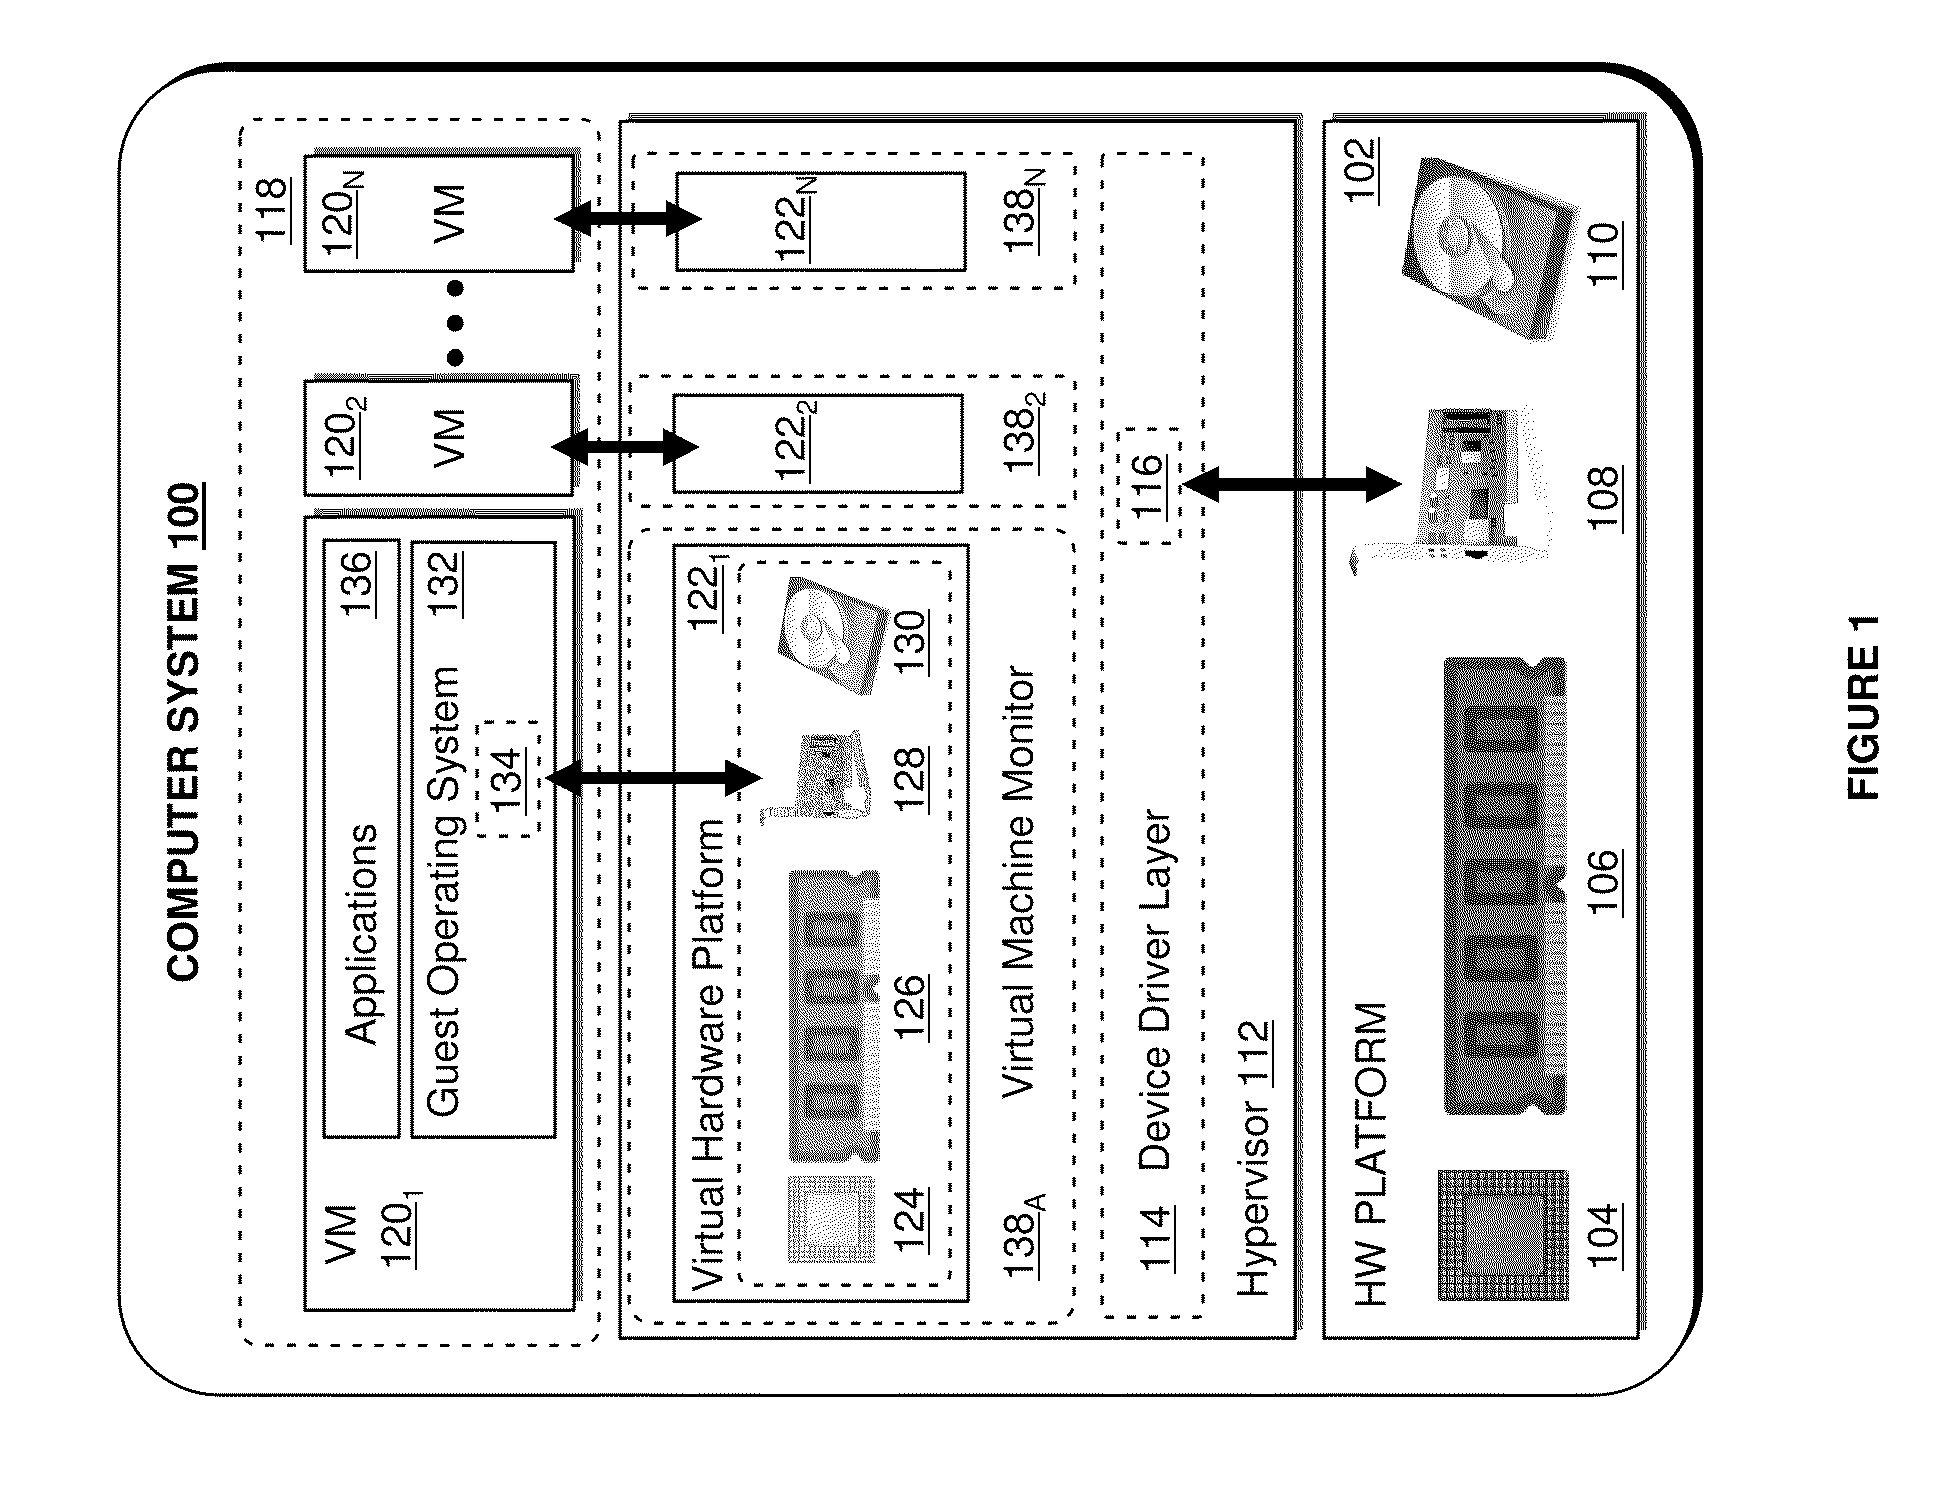 System and Method for Reducing Communication Overhead Between Network Interface Controllers and Virtual Machines